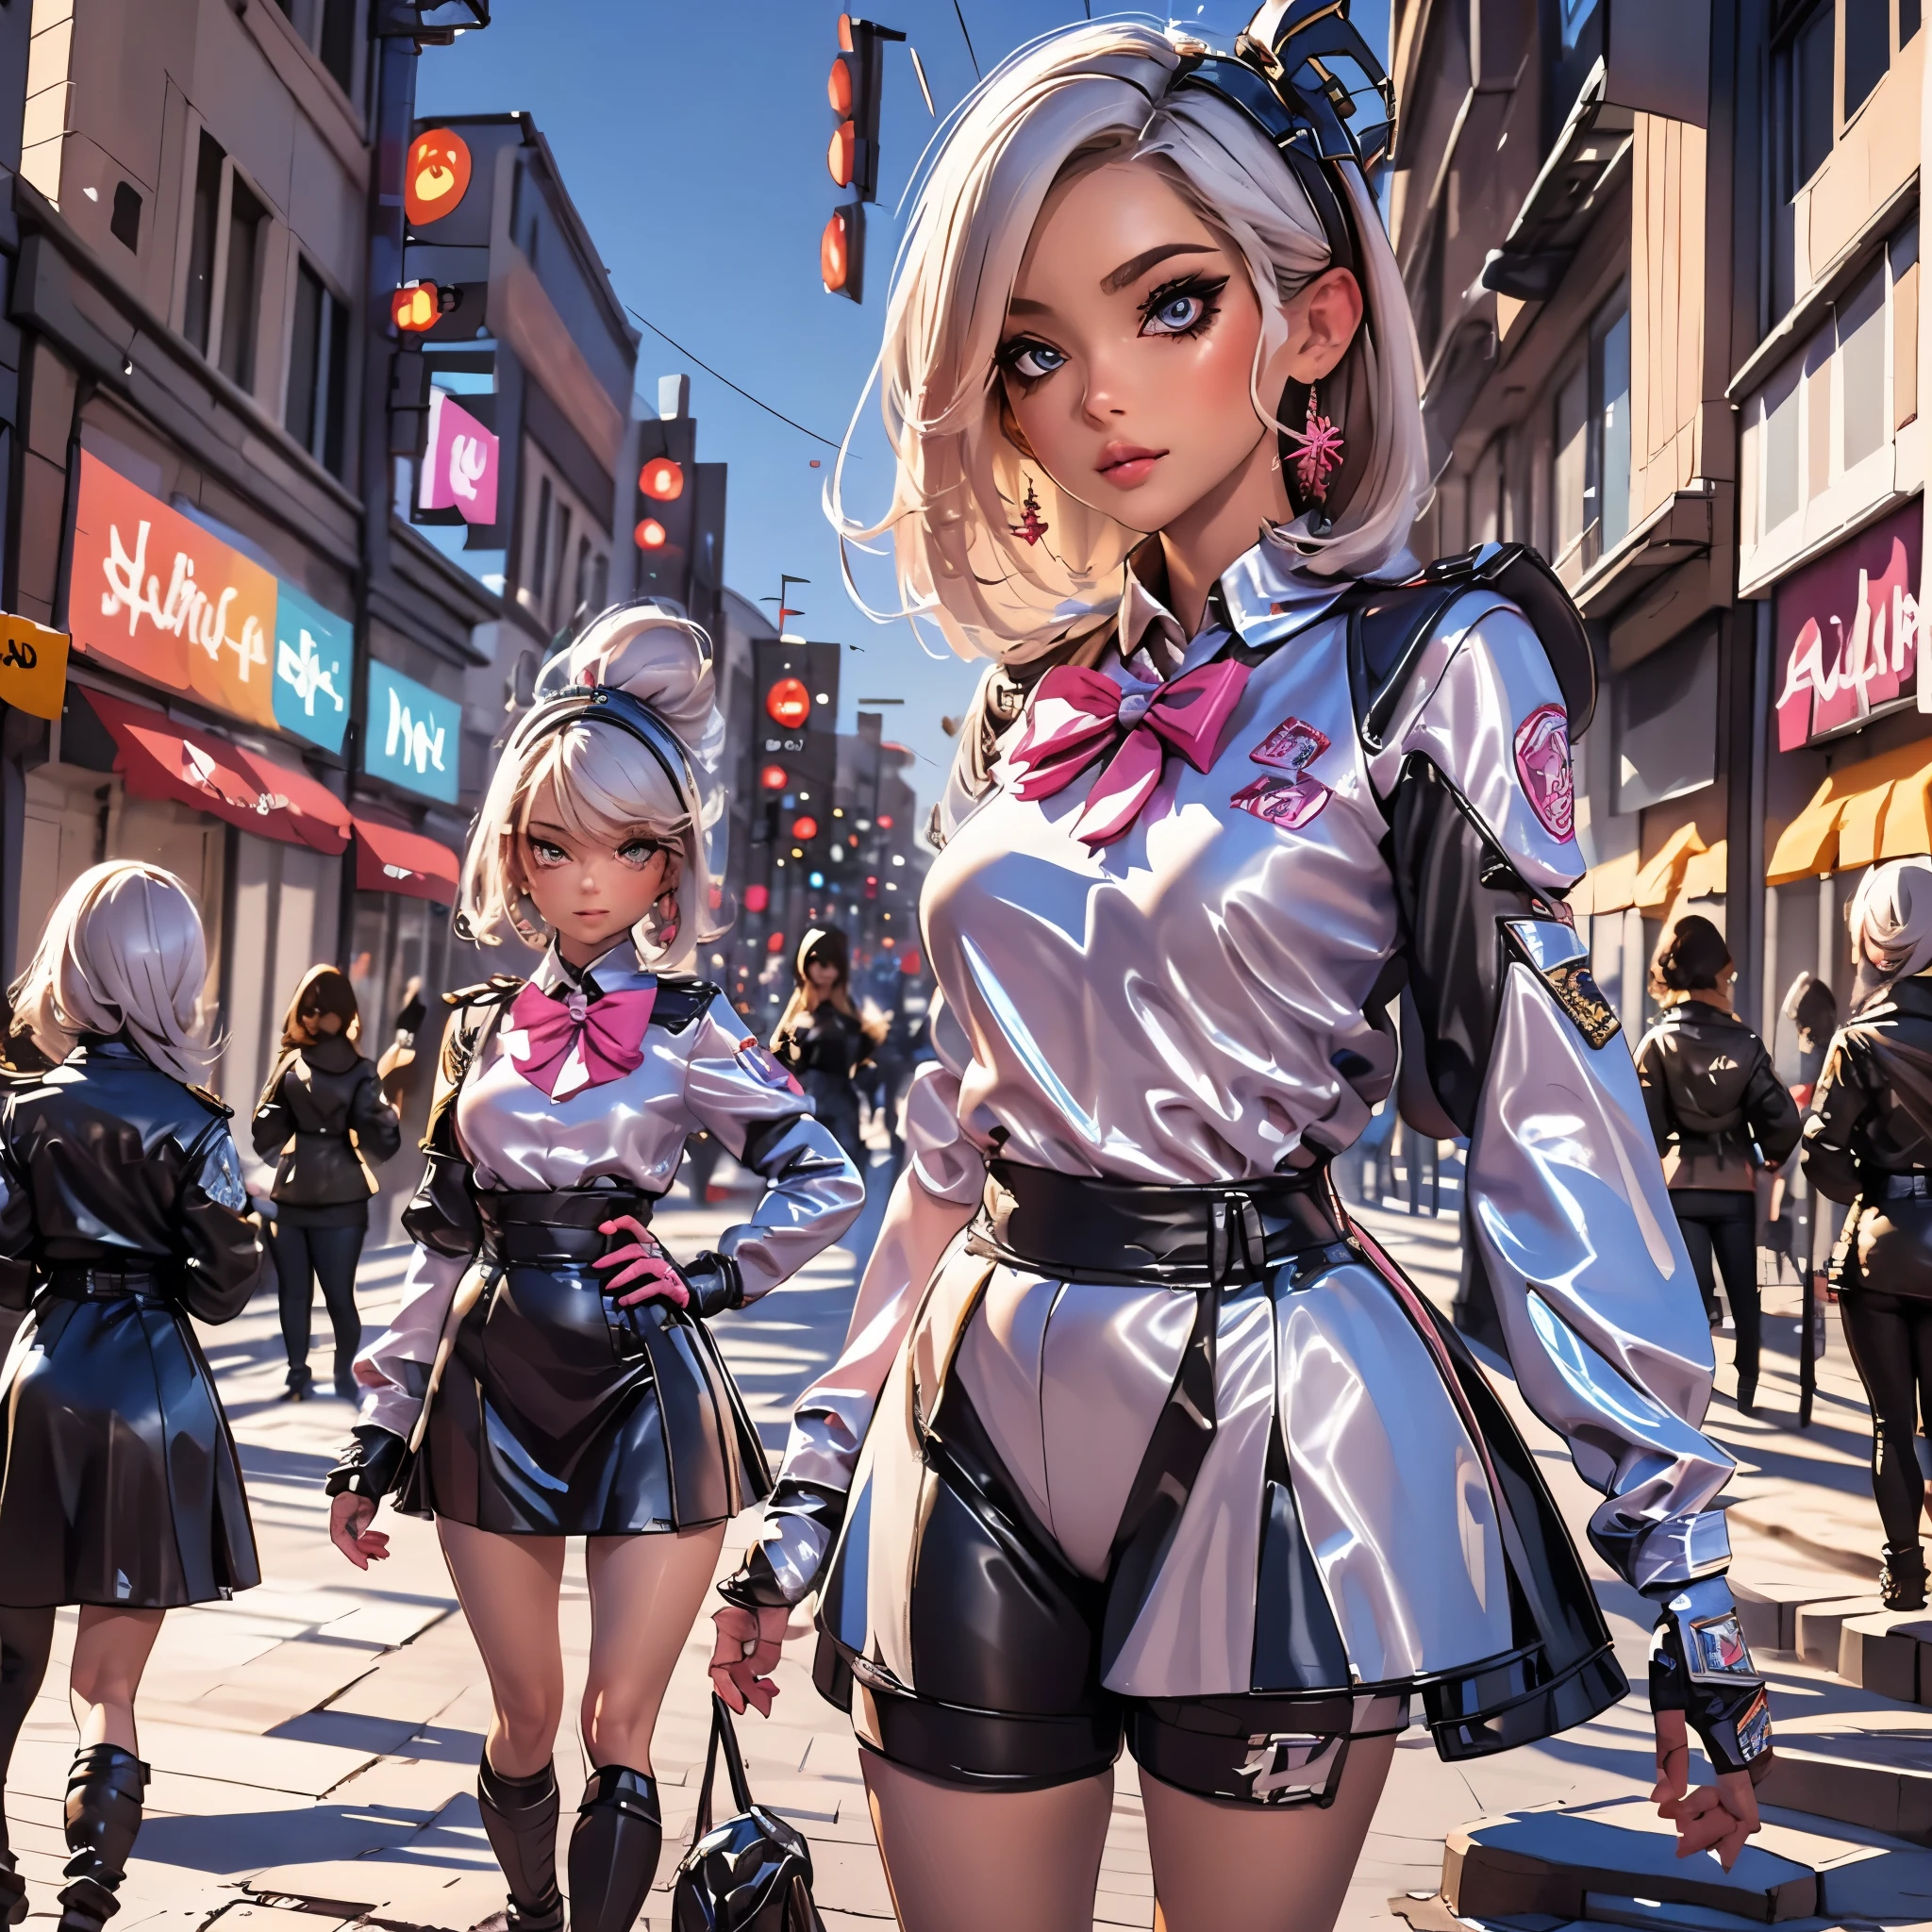 ((We have 4:1.8))、(4 sisters)、gal、(neon street)、(Four tall high school girls with model figures:1.7)、(Standing facing this), (best quality,4k,8k,highres,masterpiece:1.2),ultra-detailed,(realistic,photorealistic,photo-realistic:1.37),portraits,[close up],[women],[group],[short skirts],A close up of a group of women in short skirts, beautiful detailed eyes,beautiful detailed lips,extremely detailed faces,gorgeous makeup,stylish hairstyles,fashionable outfits,sassy poses,confident expressions,city backdrop,vibrant colors,soft lighting,colorful bokeh. ultra-high-quality. ultra detail.
